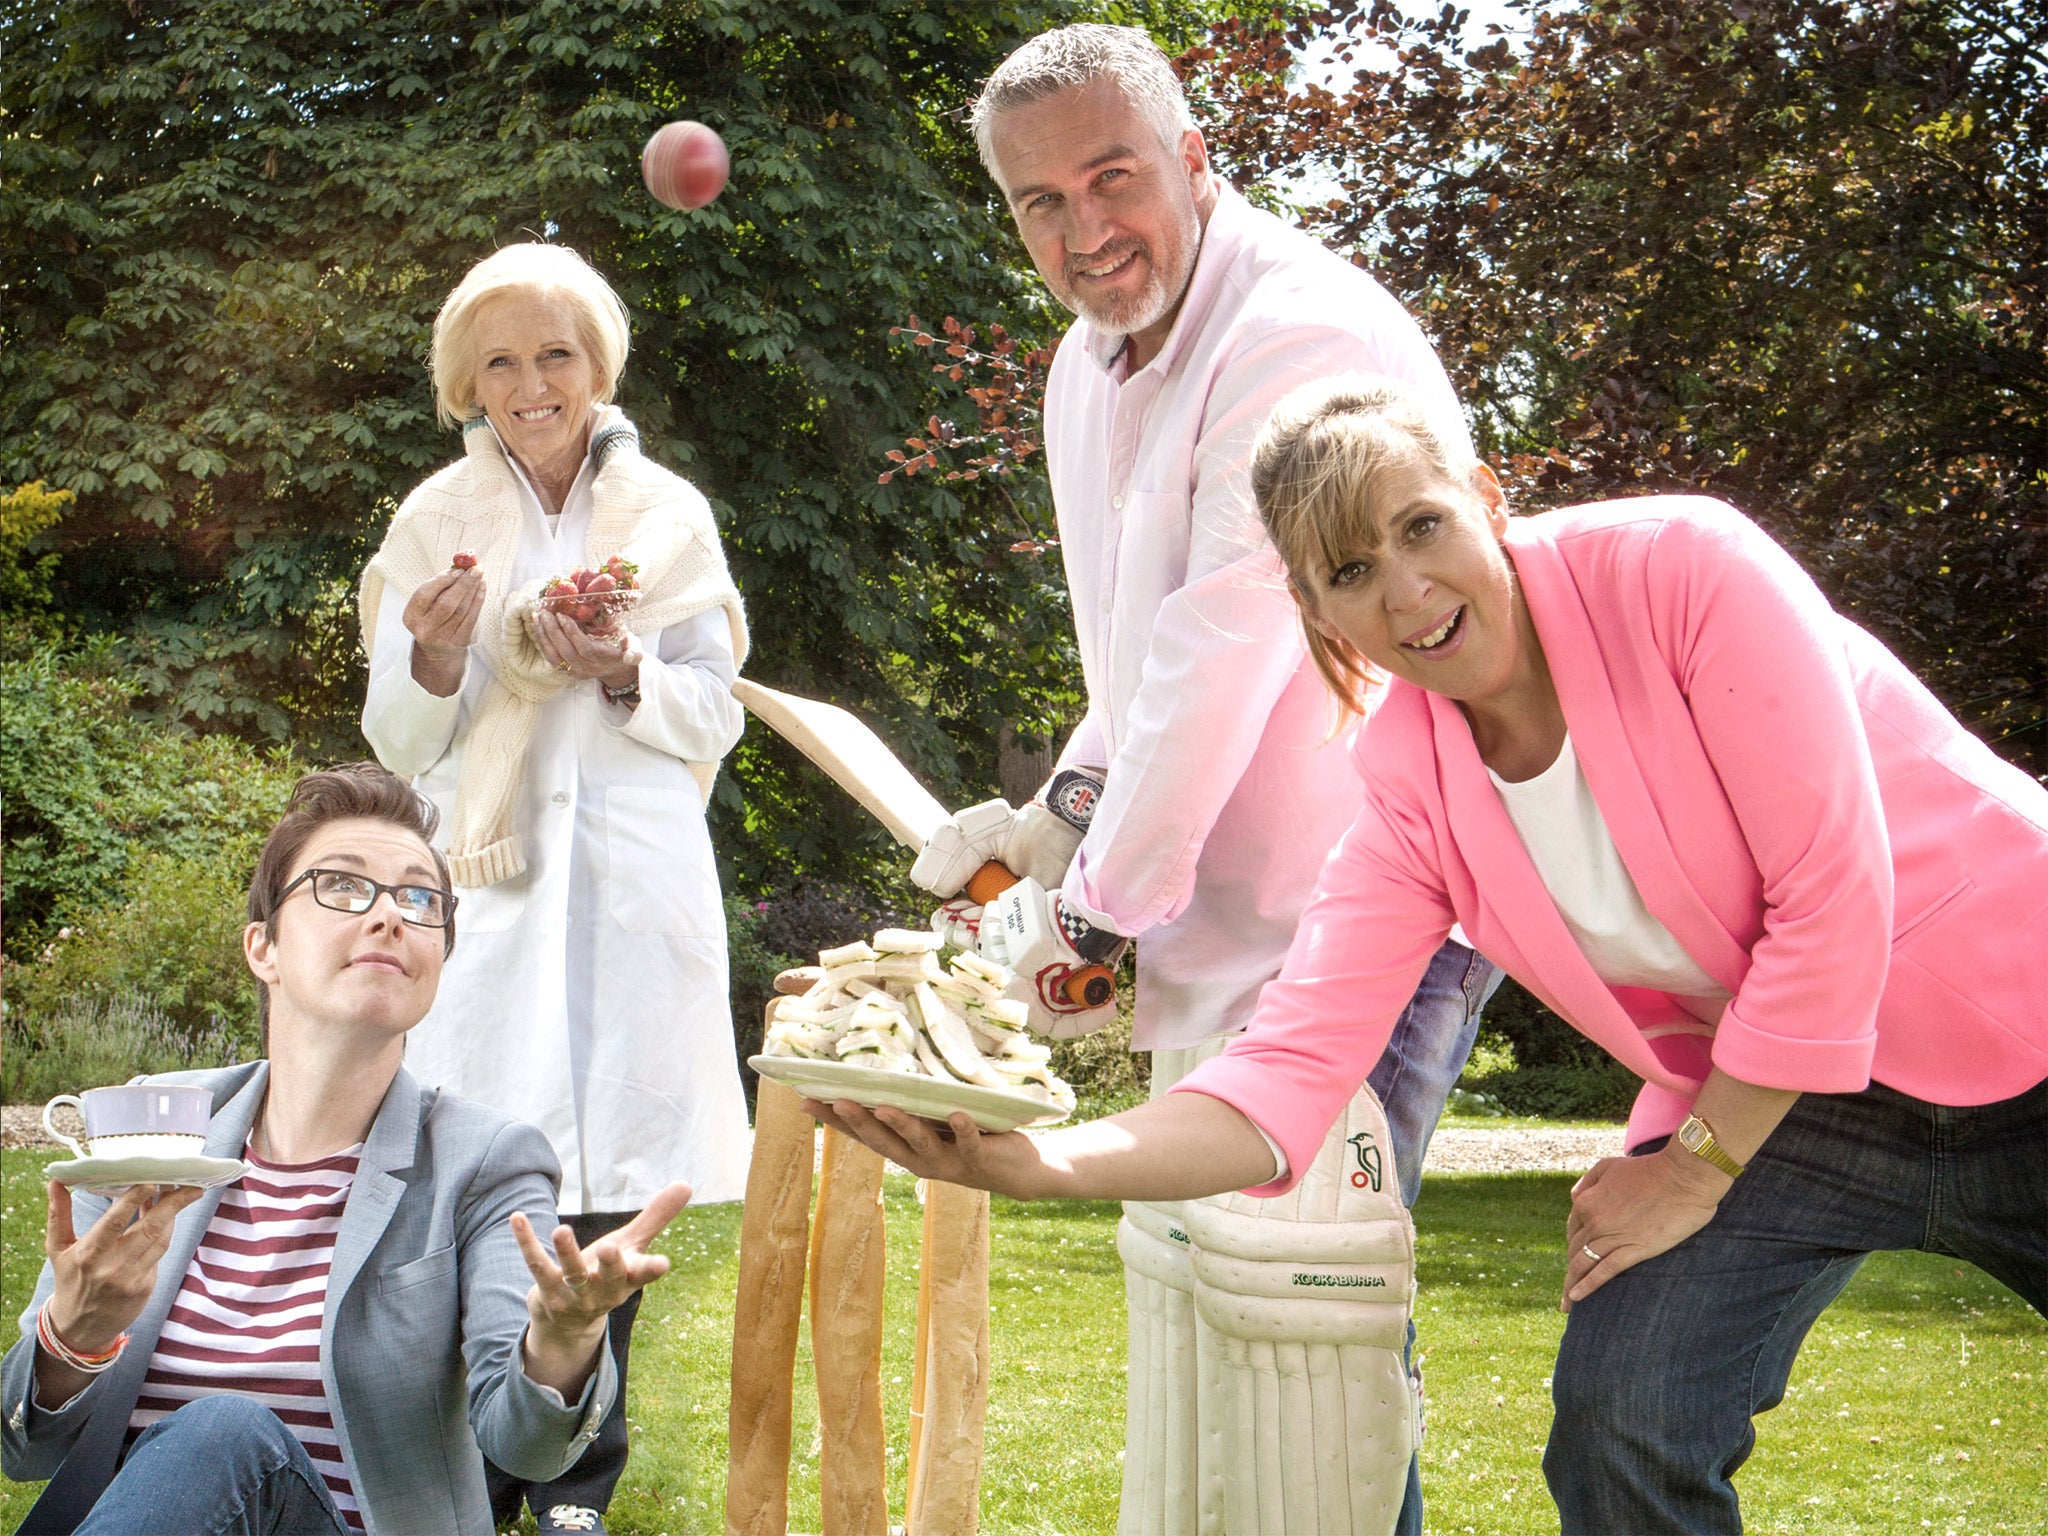 The GBBO team: Mary Berry, Paul Hollywood, Sue Perkins and Mel Giedroyc